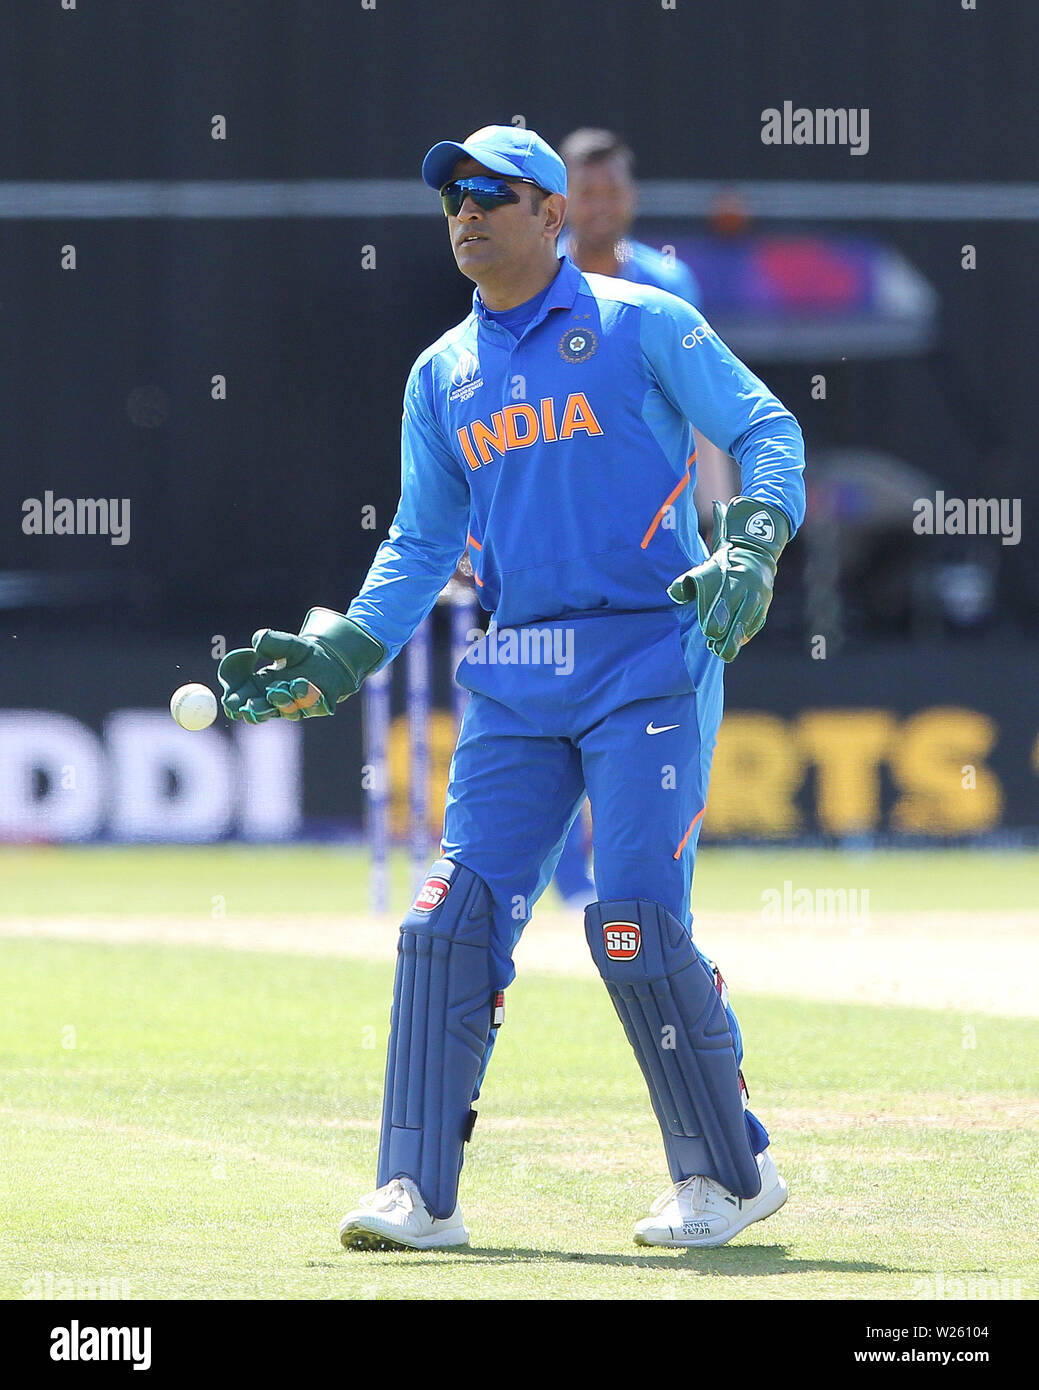 dhoni wallpapers